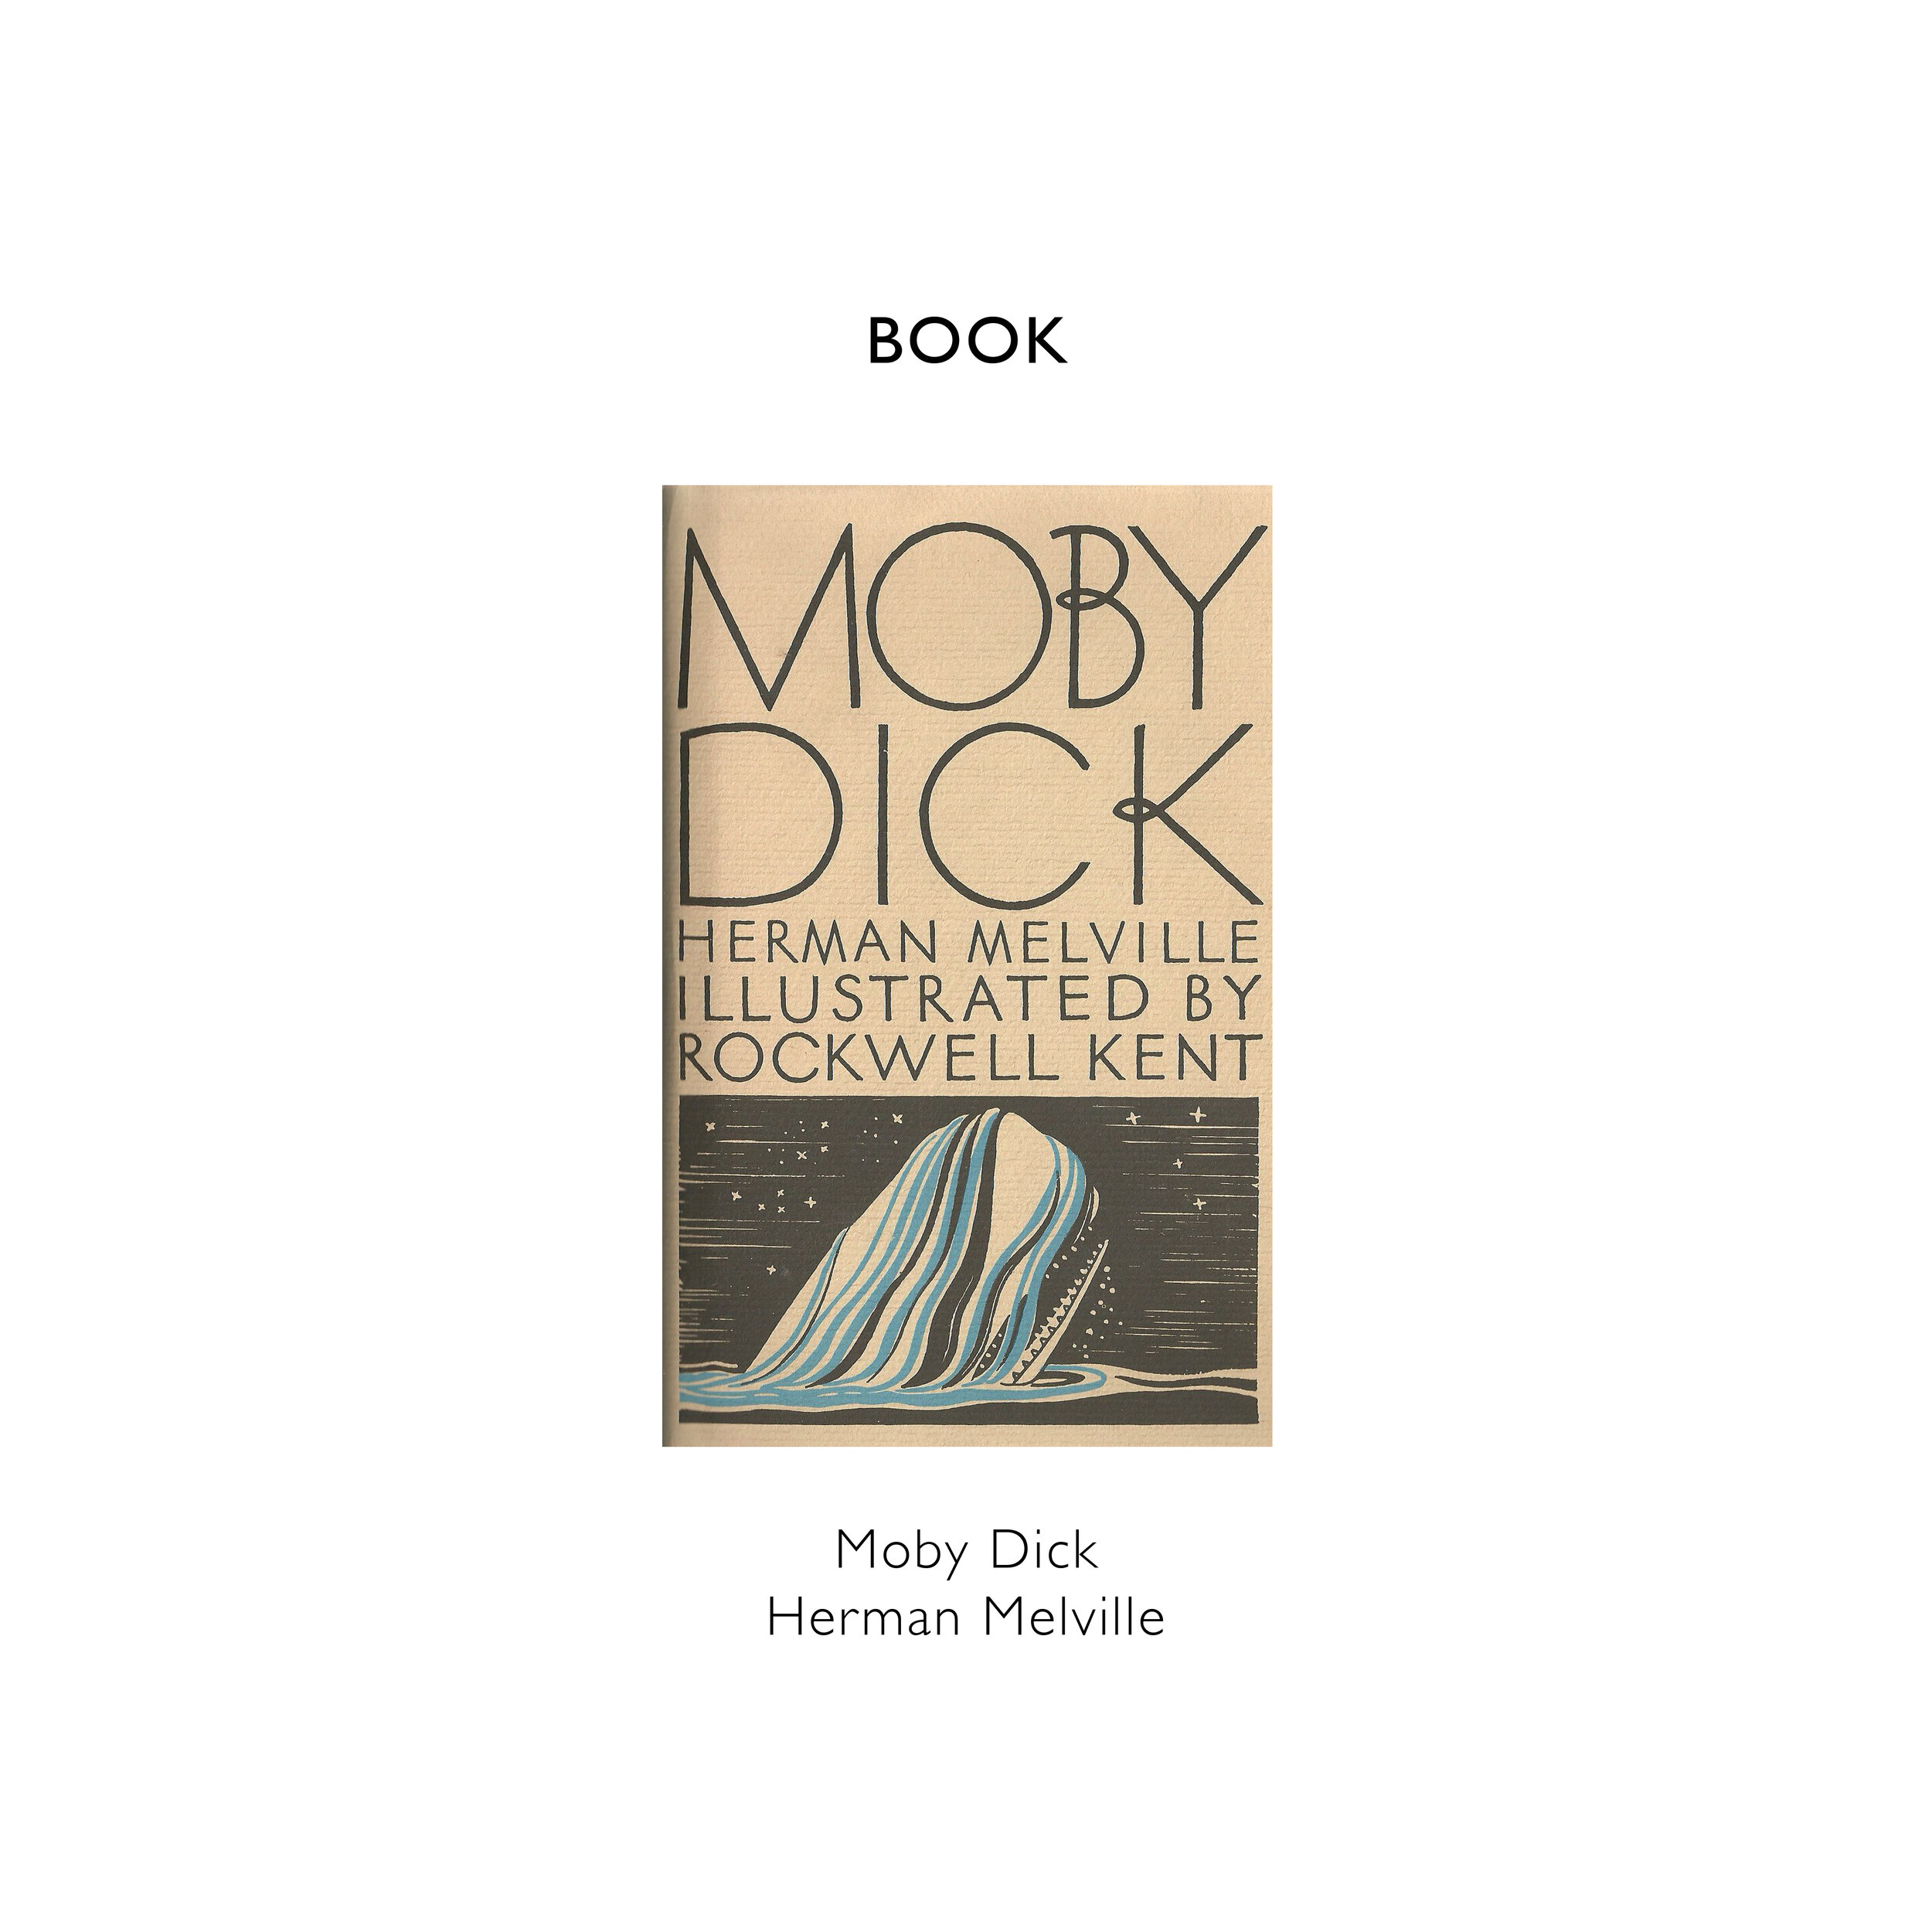 REFERENCE BLOG TEMPLATE Moby Dick Herman Melville copy.jpg